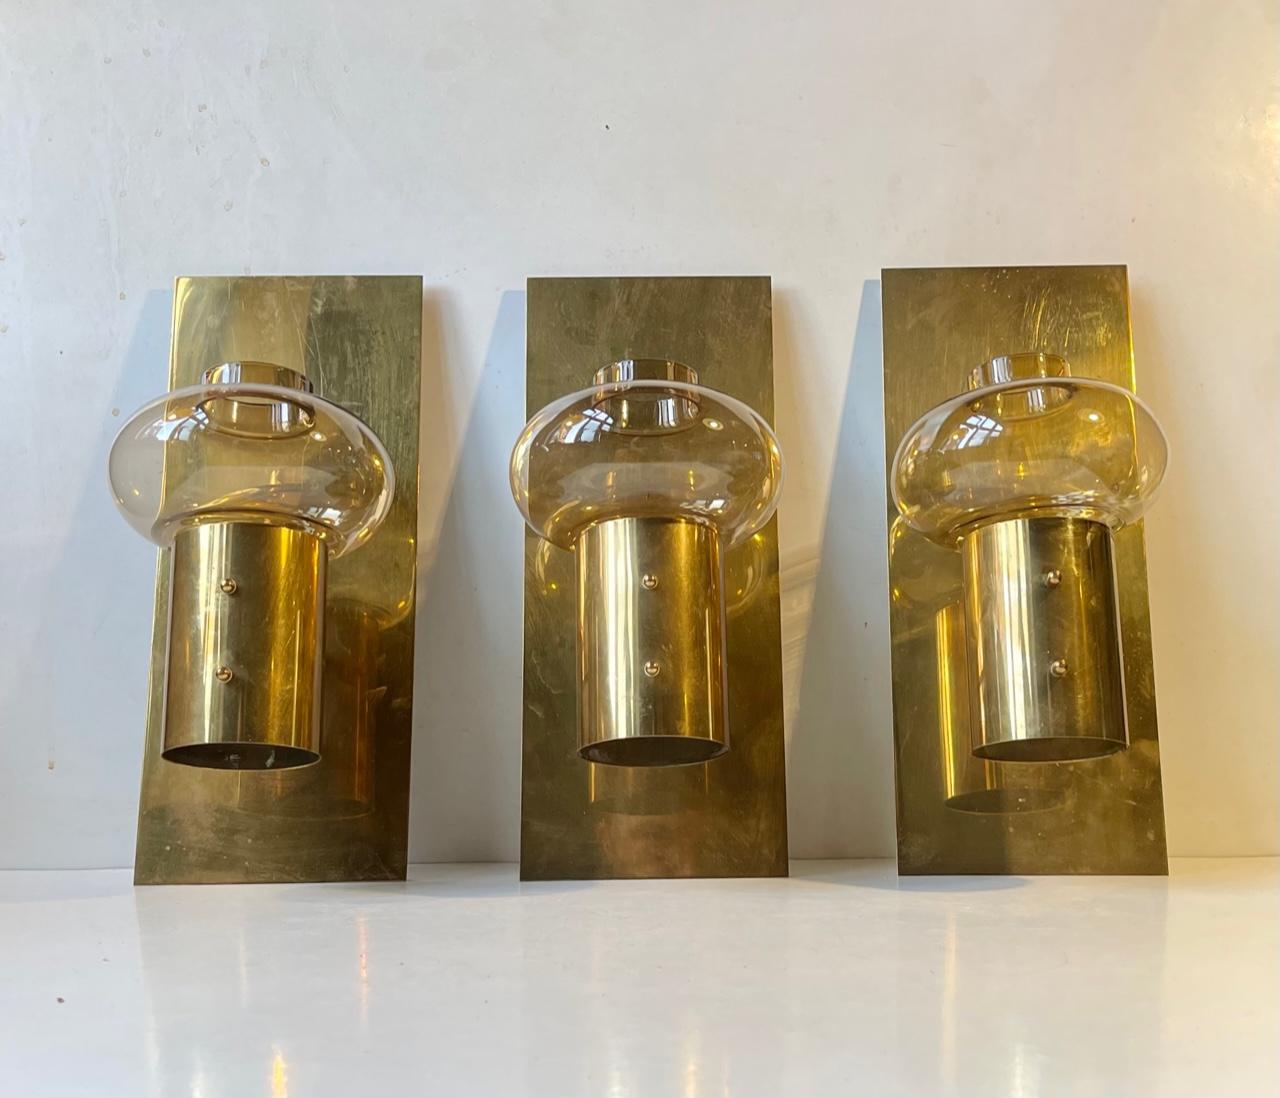 Attractive trio of mid-century wall candle lamps - sconces in solid brass made by Colseth Norway during the 1960s. Featuring tulip shaped smoky amber colored glass shades placed in front of the simple yet stylish back panels. Removable glass. For